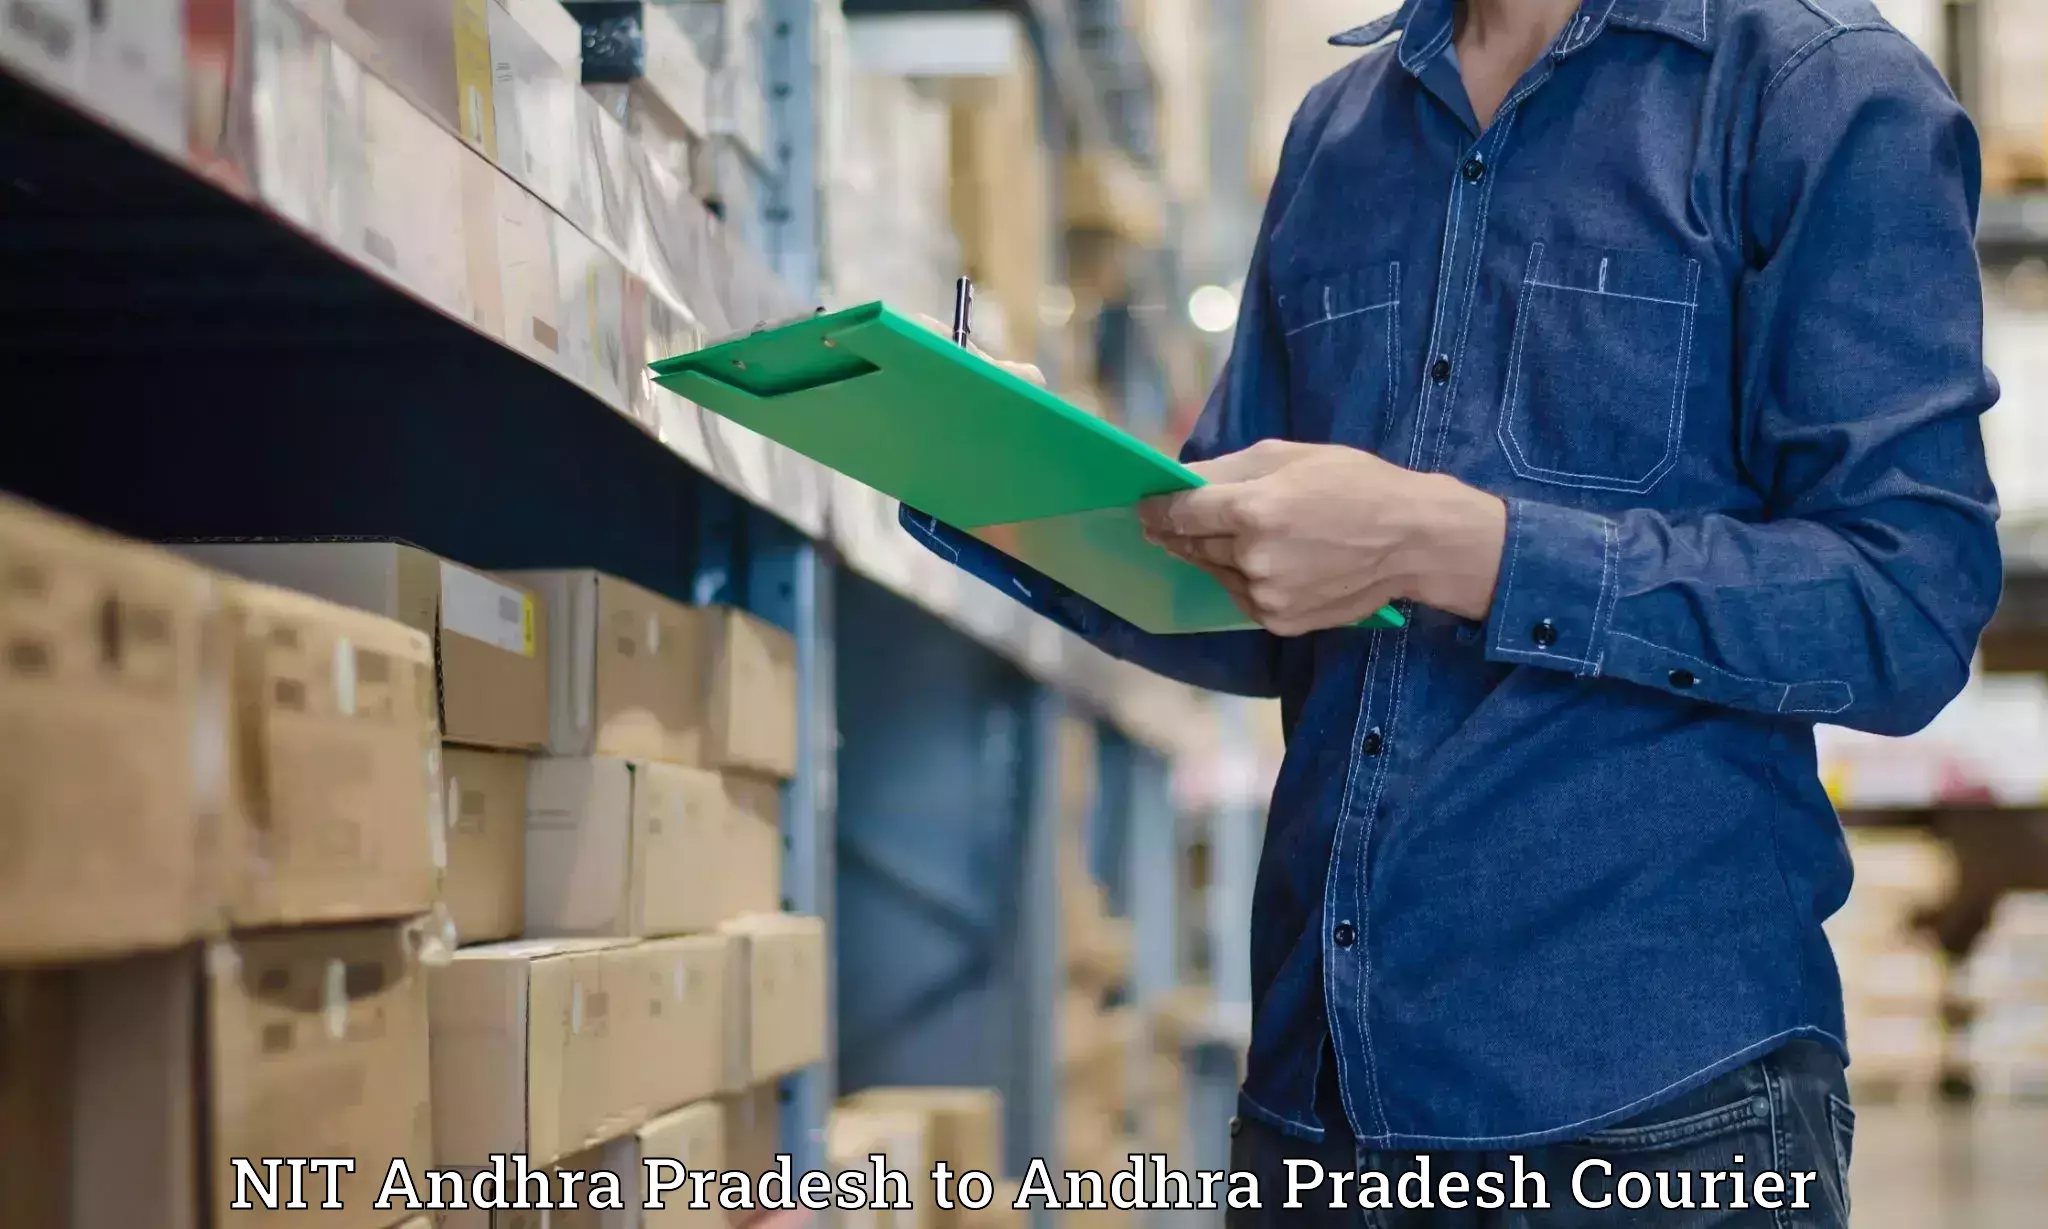 Cash on delivery service in NIT Andhra Pradesh to Visakhapatnam Port